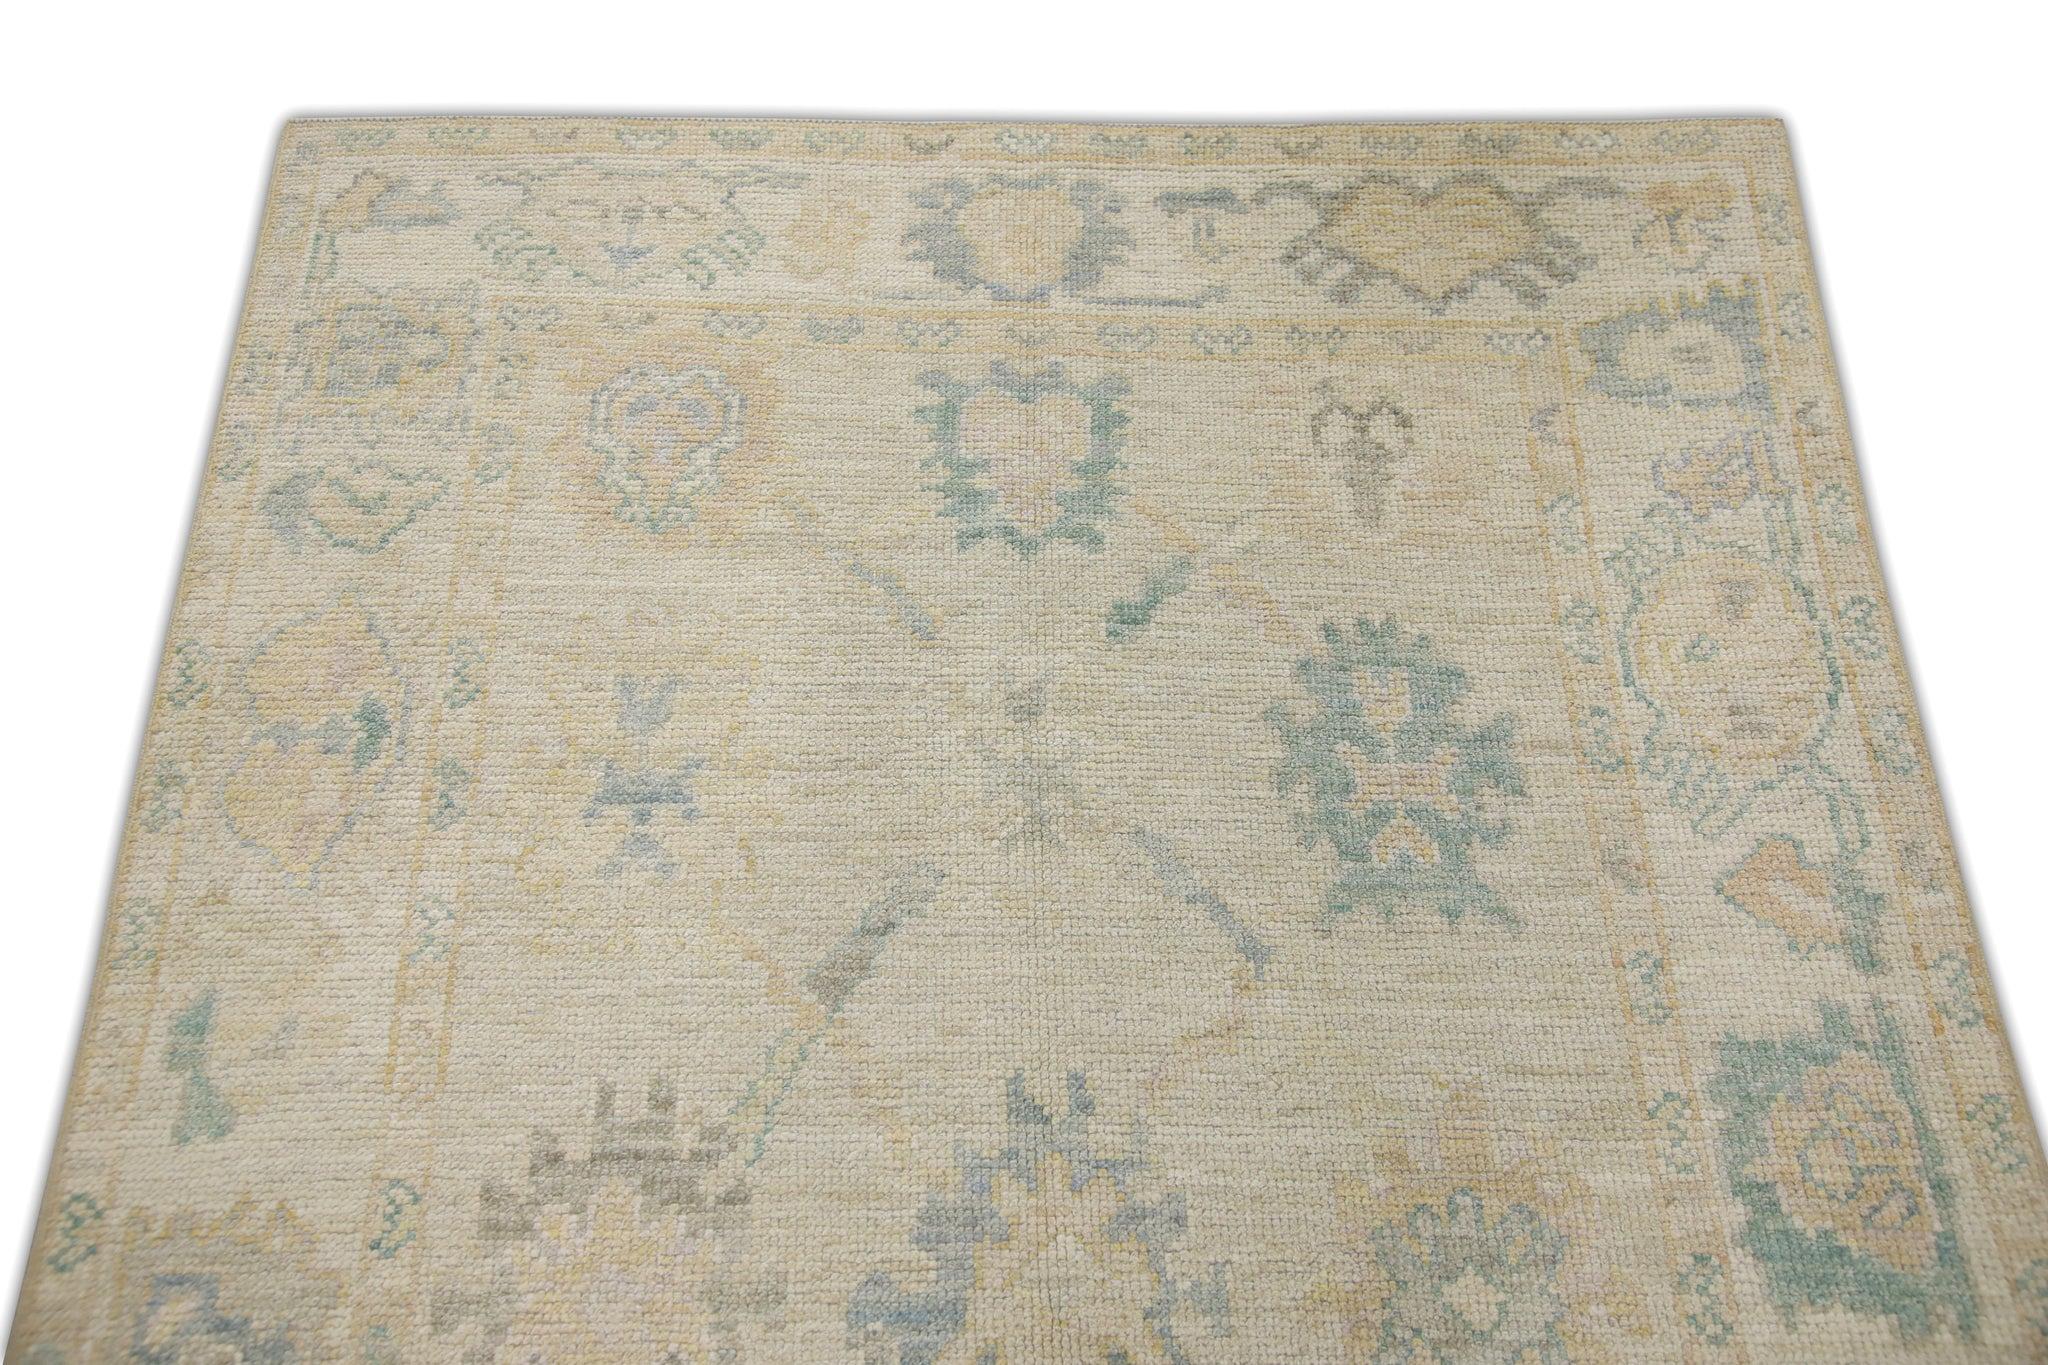 Vegetable Dyed Multicolor Handwoven Wool Turkish Oushak Rug in Floral Design 4' x 5'9